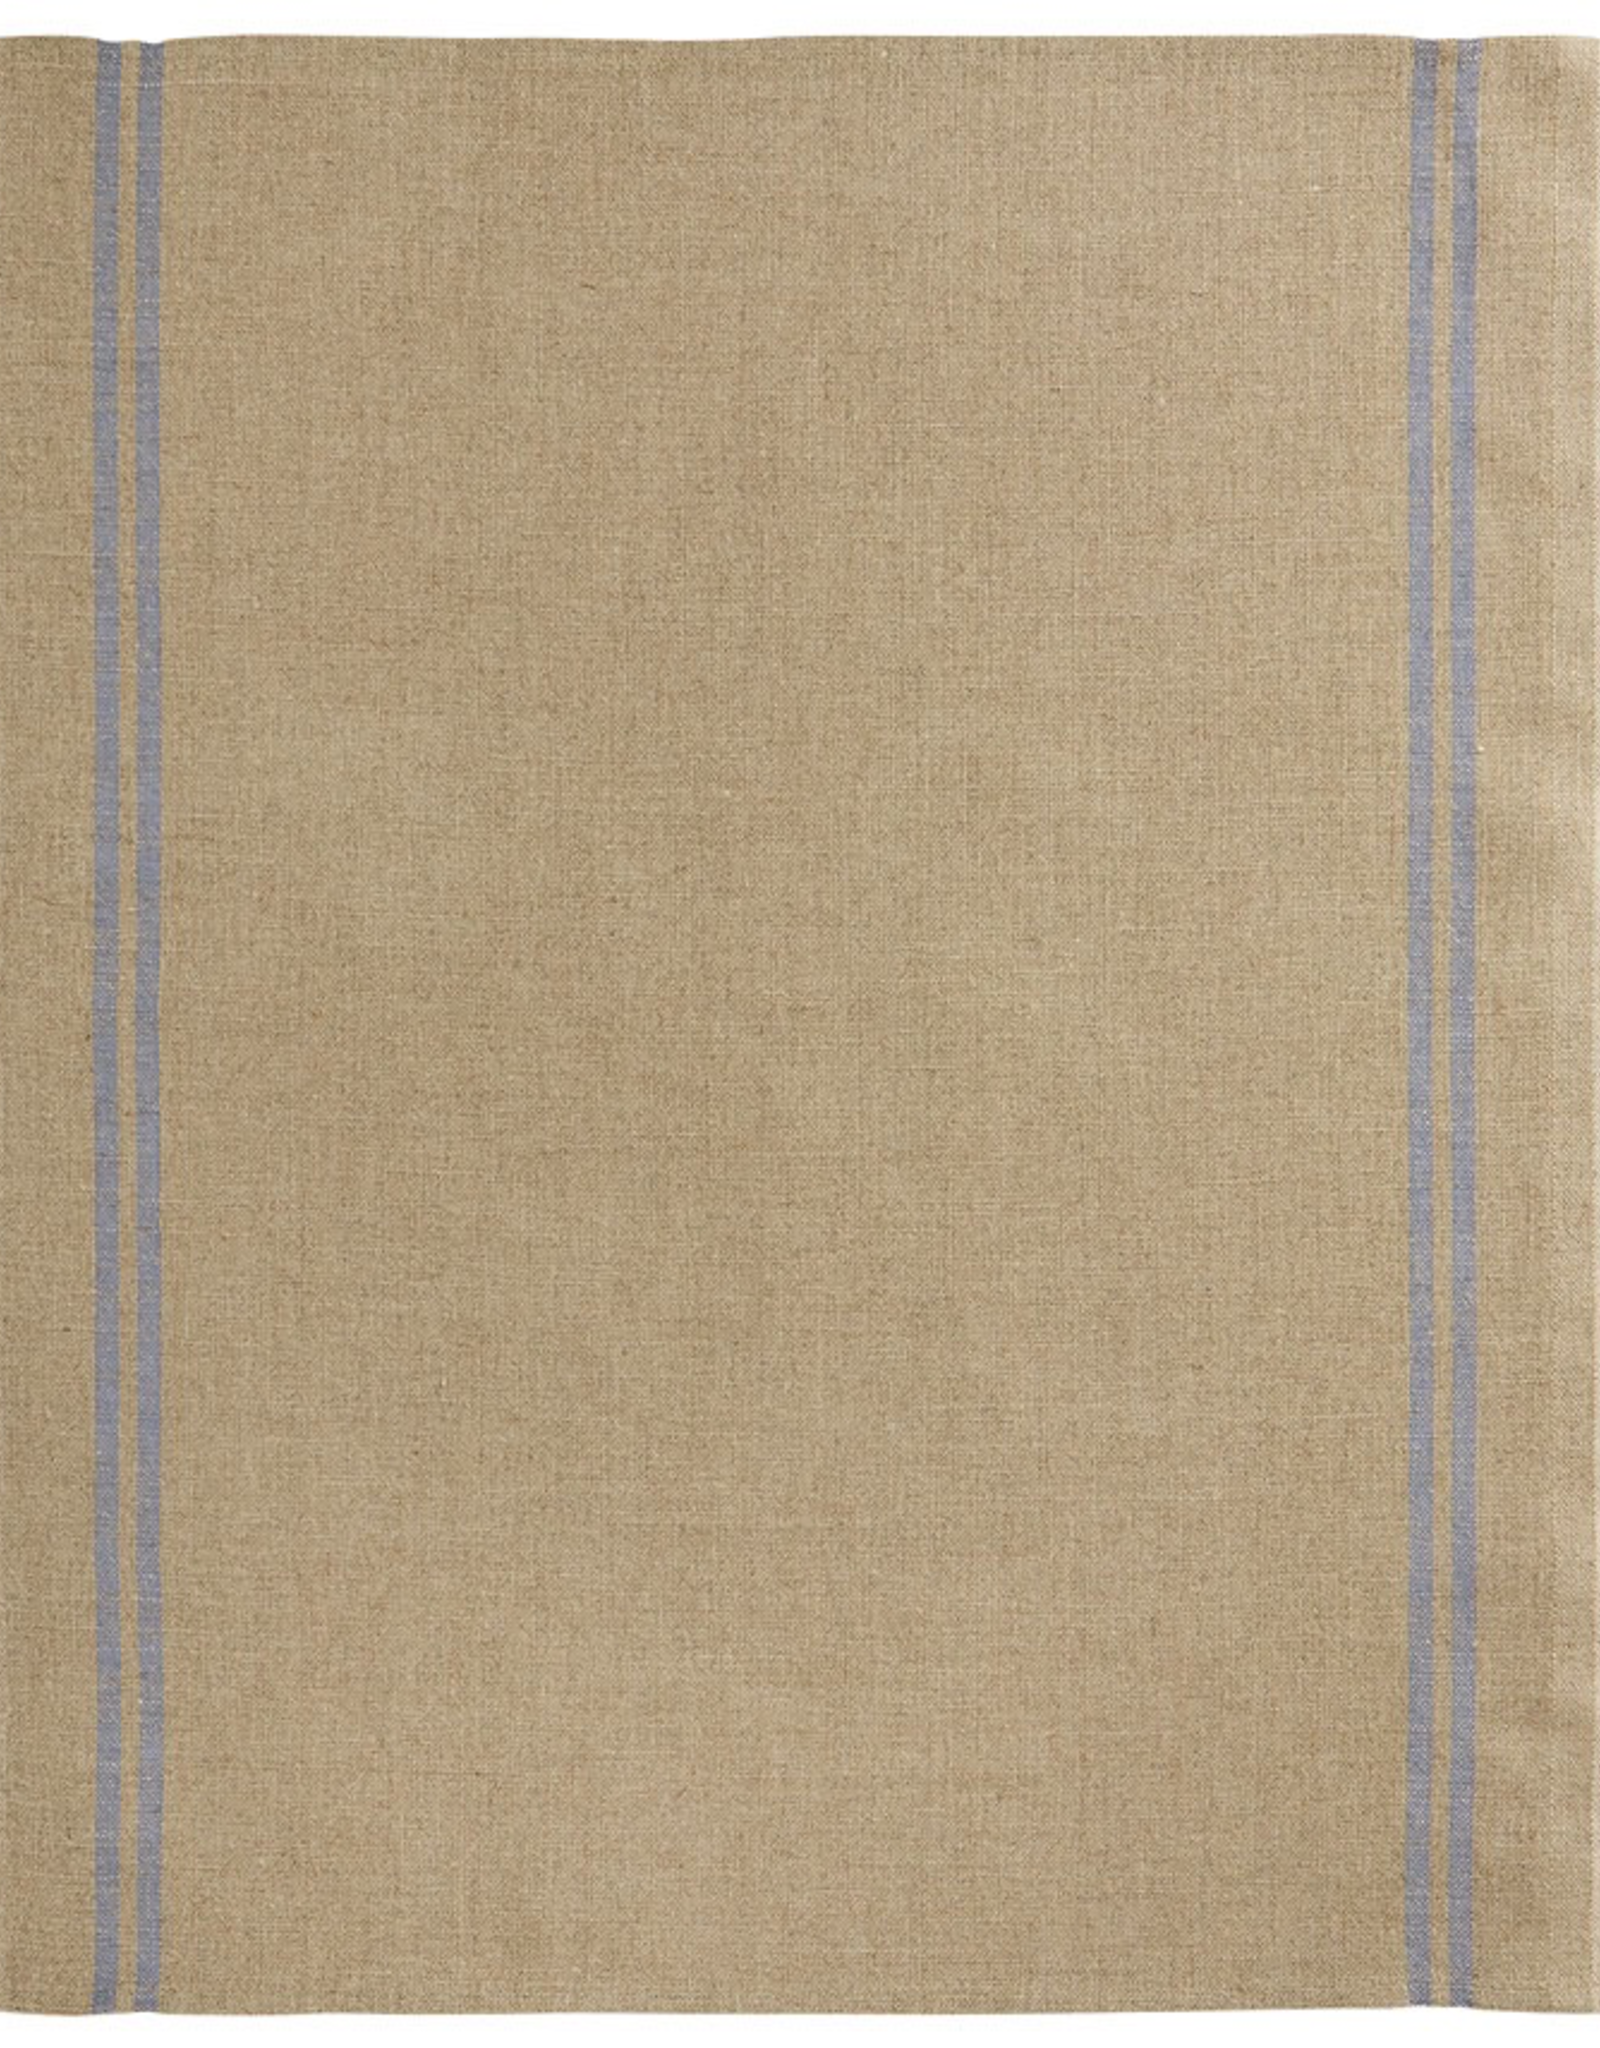 Country Natural with Blue Stripe Washed Linen Tea Towel